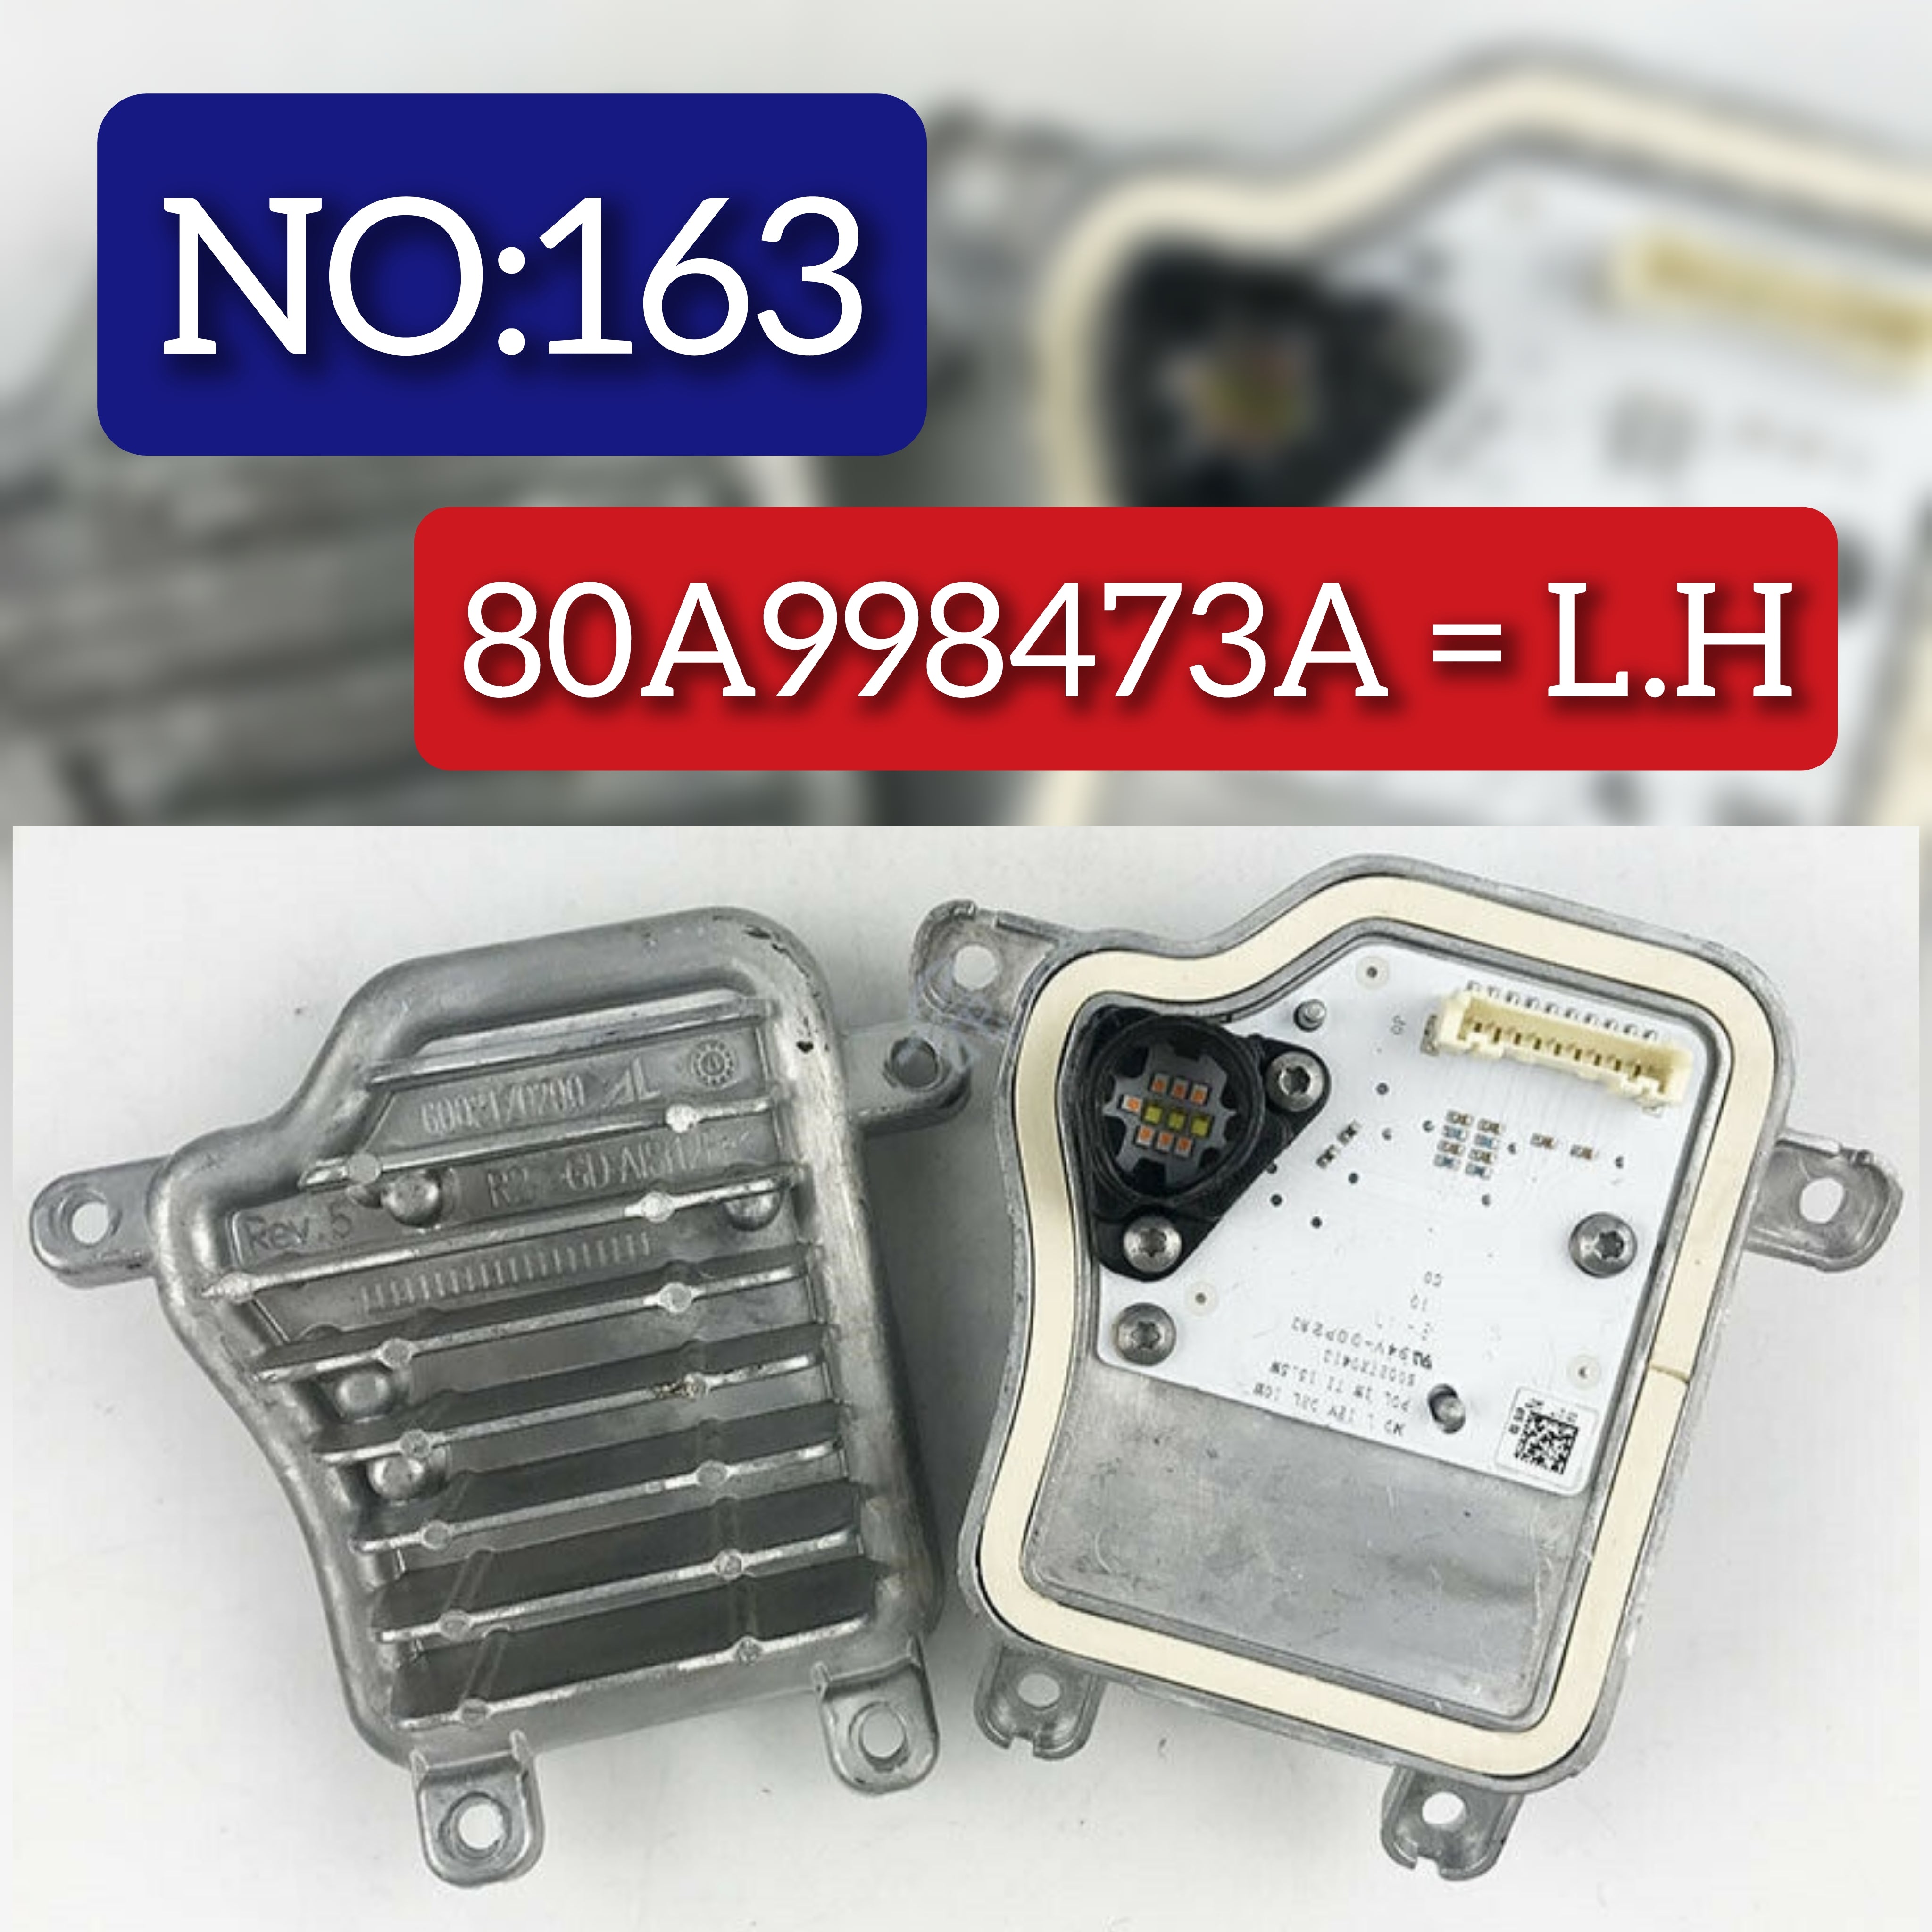 LEFT DayTime Running DRL LED Control Module 80A998473A (L.H) Left For  AUDI Q5 Tag-BL- 163